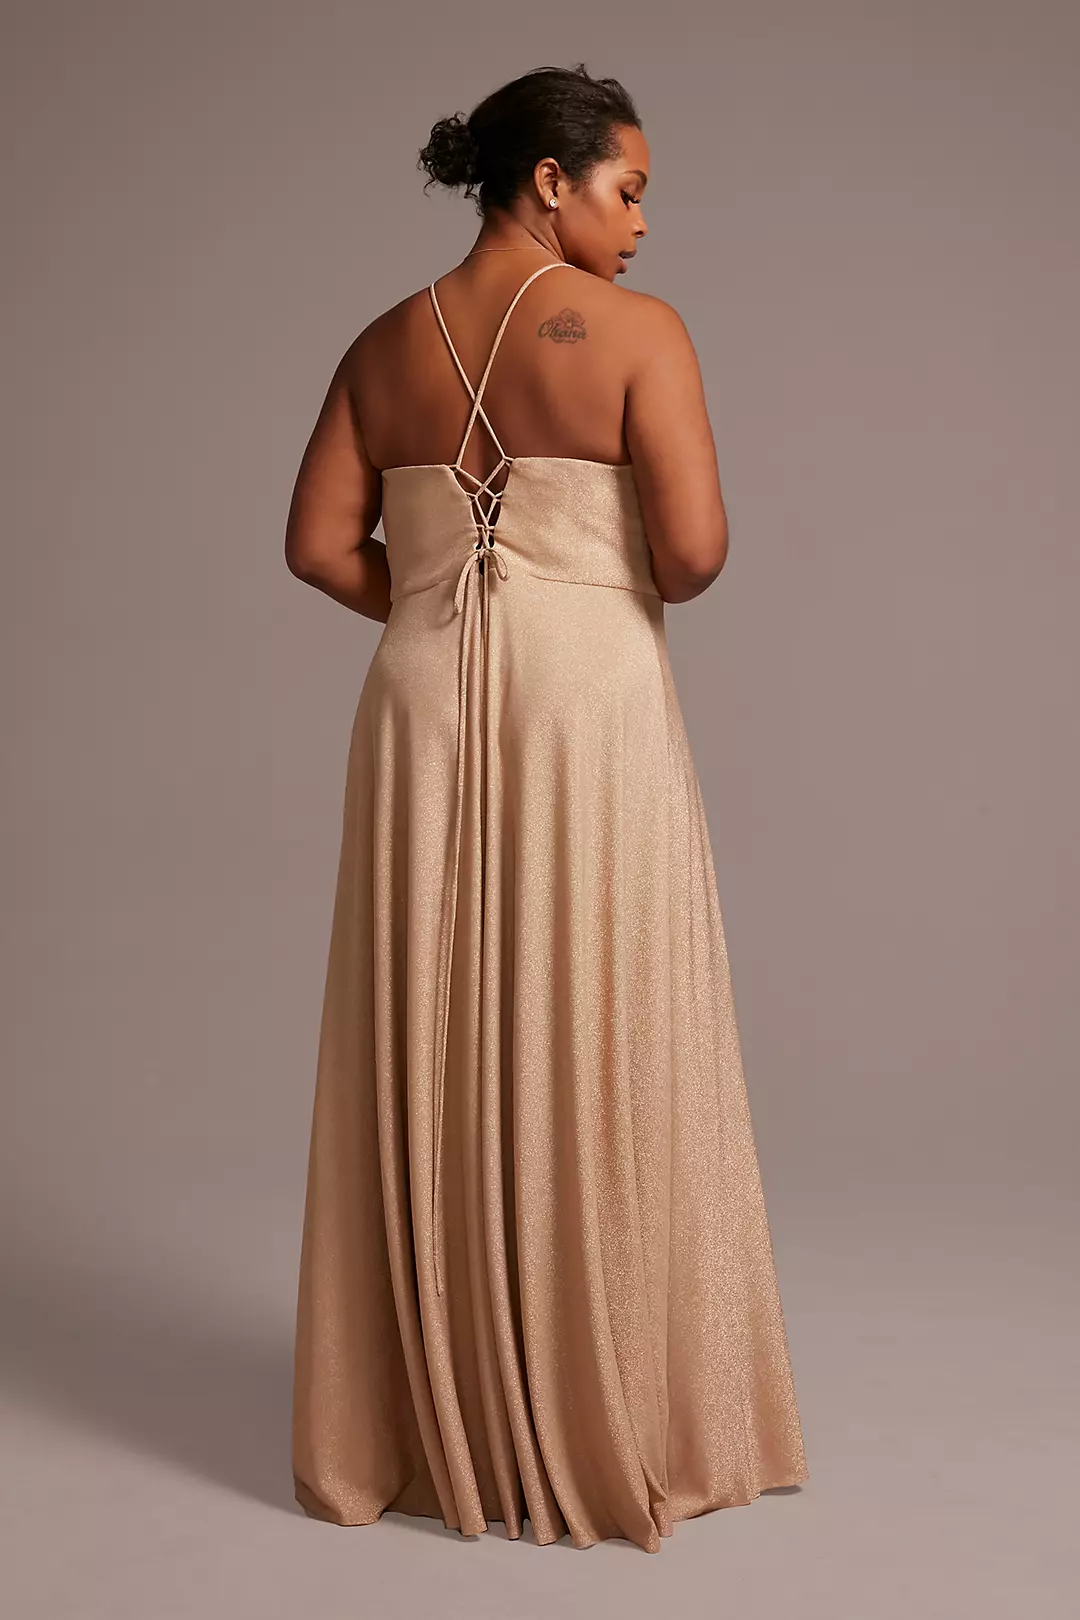 Metallic Cowl Neck Dress with Lace-Up Back Image 2